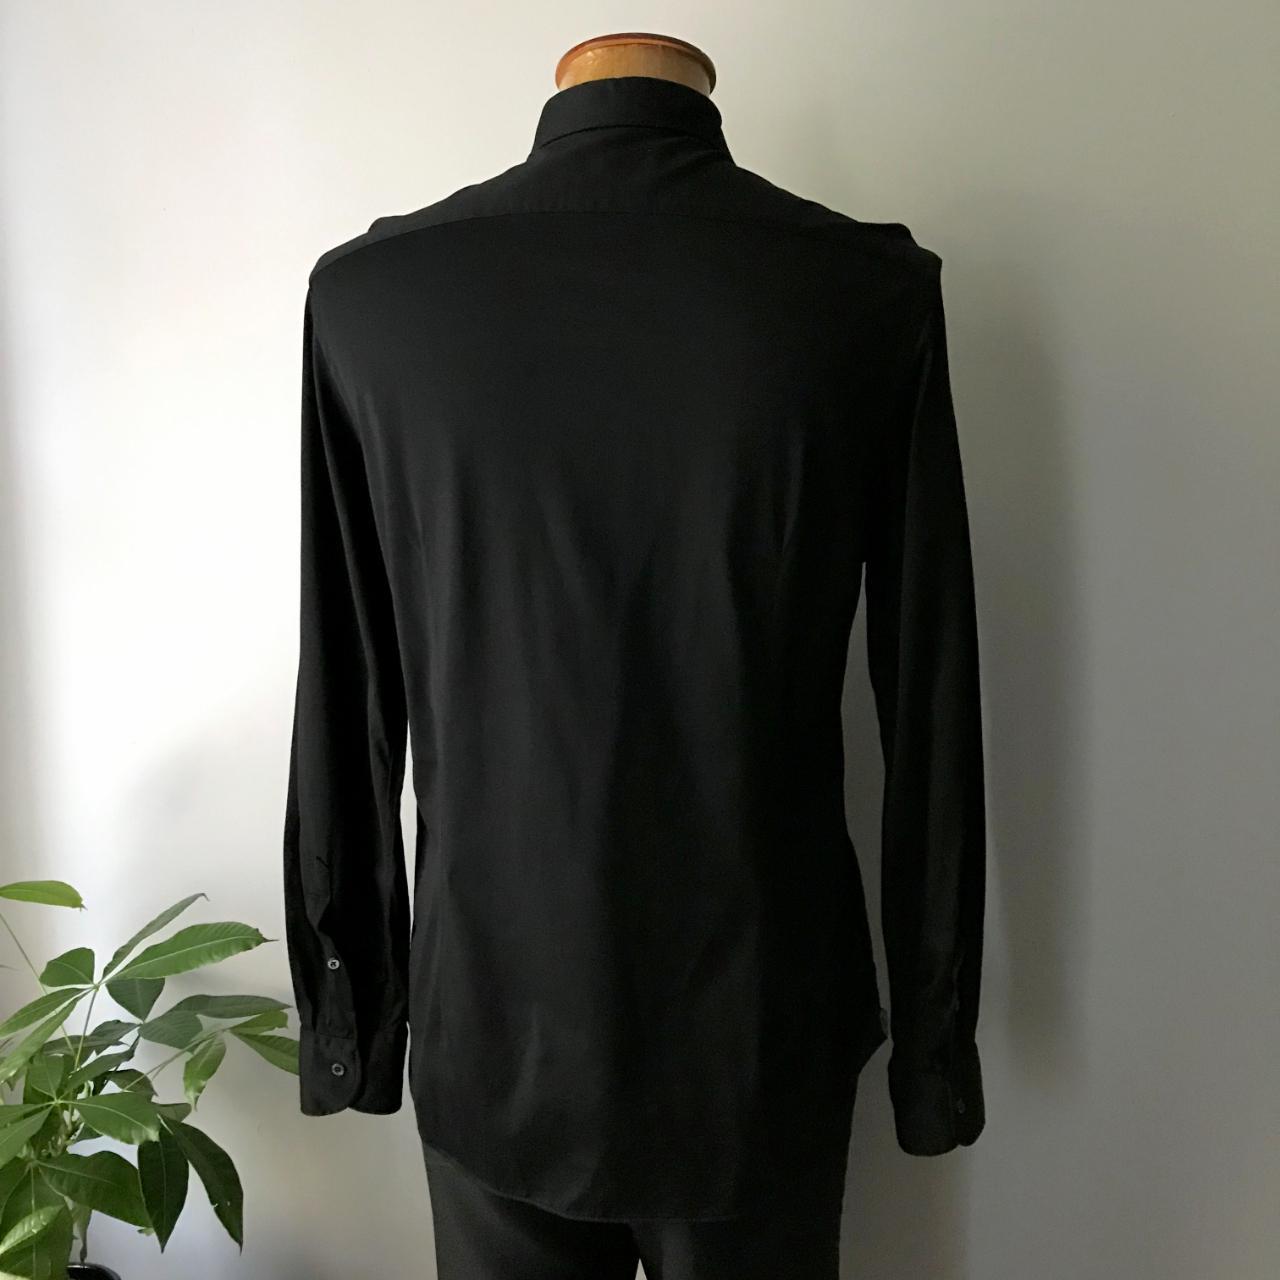 Product Image 3 - Modern black dress shirt with